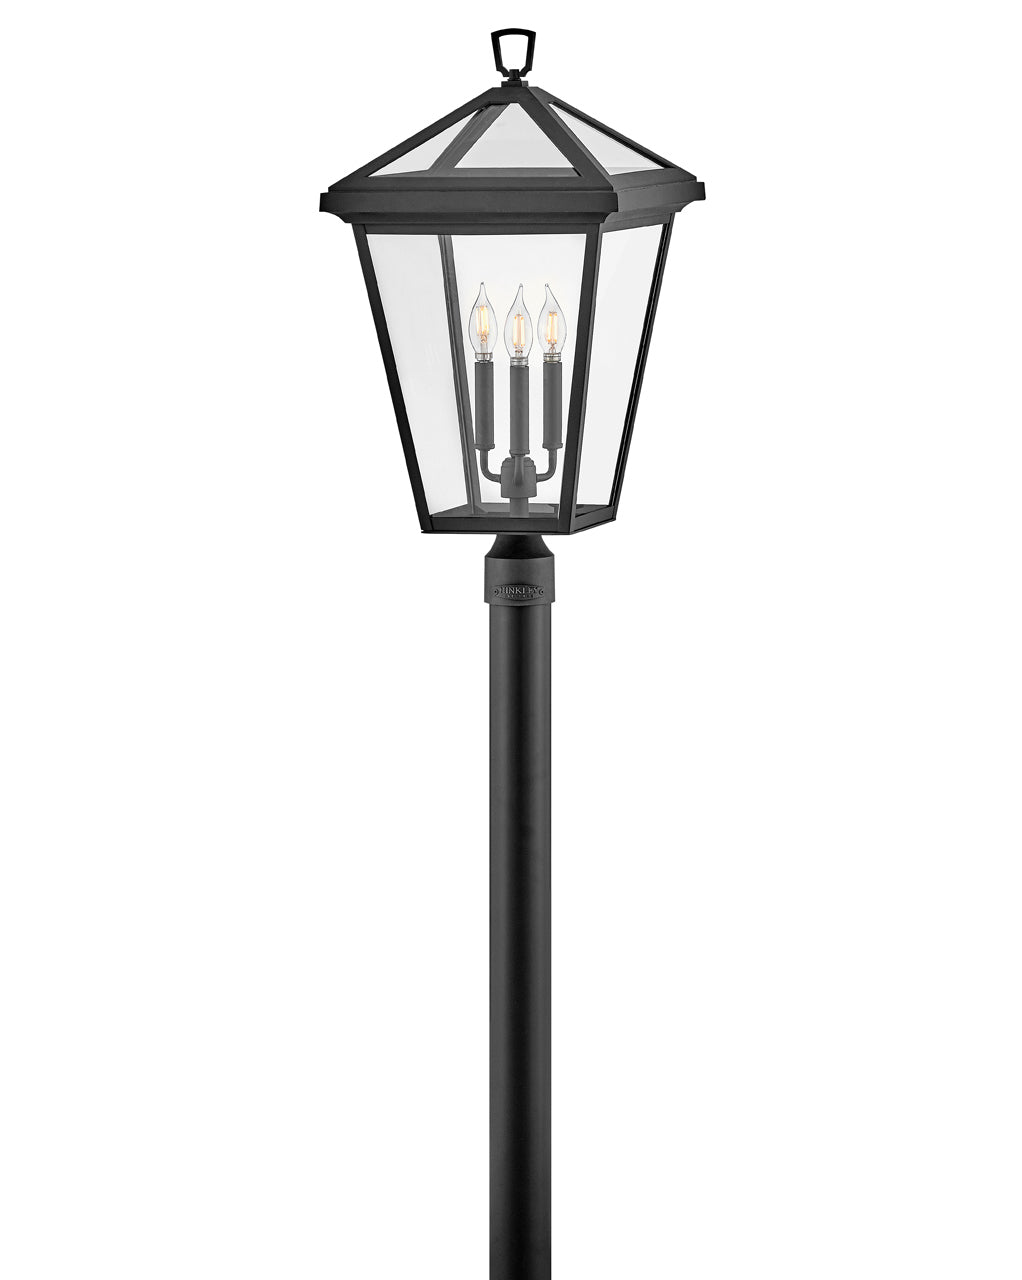 OUTDOOR ALFORD PLACE Post Top or Pier Mount Lantern